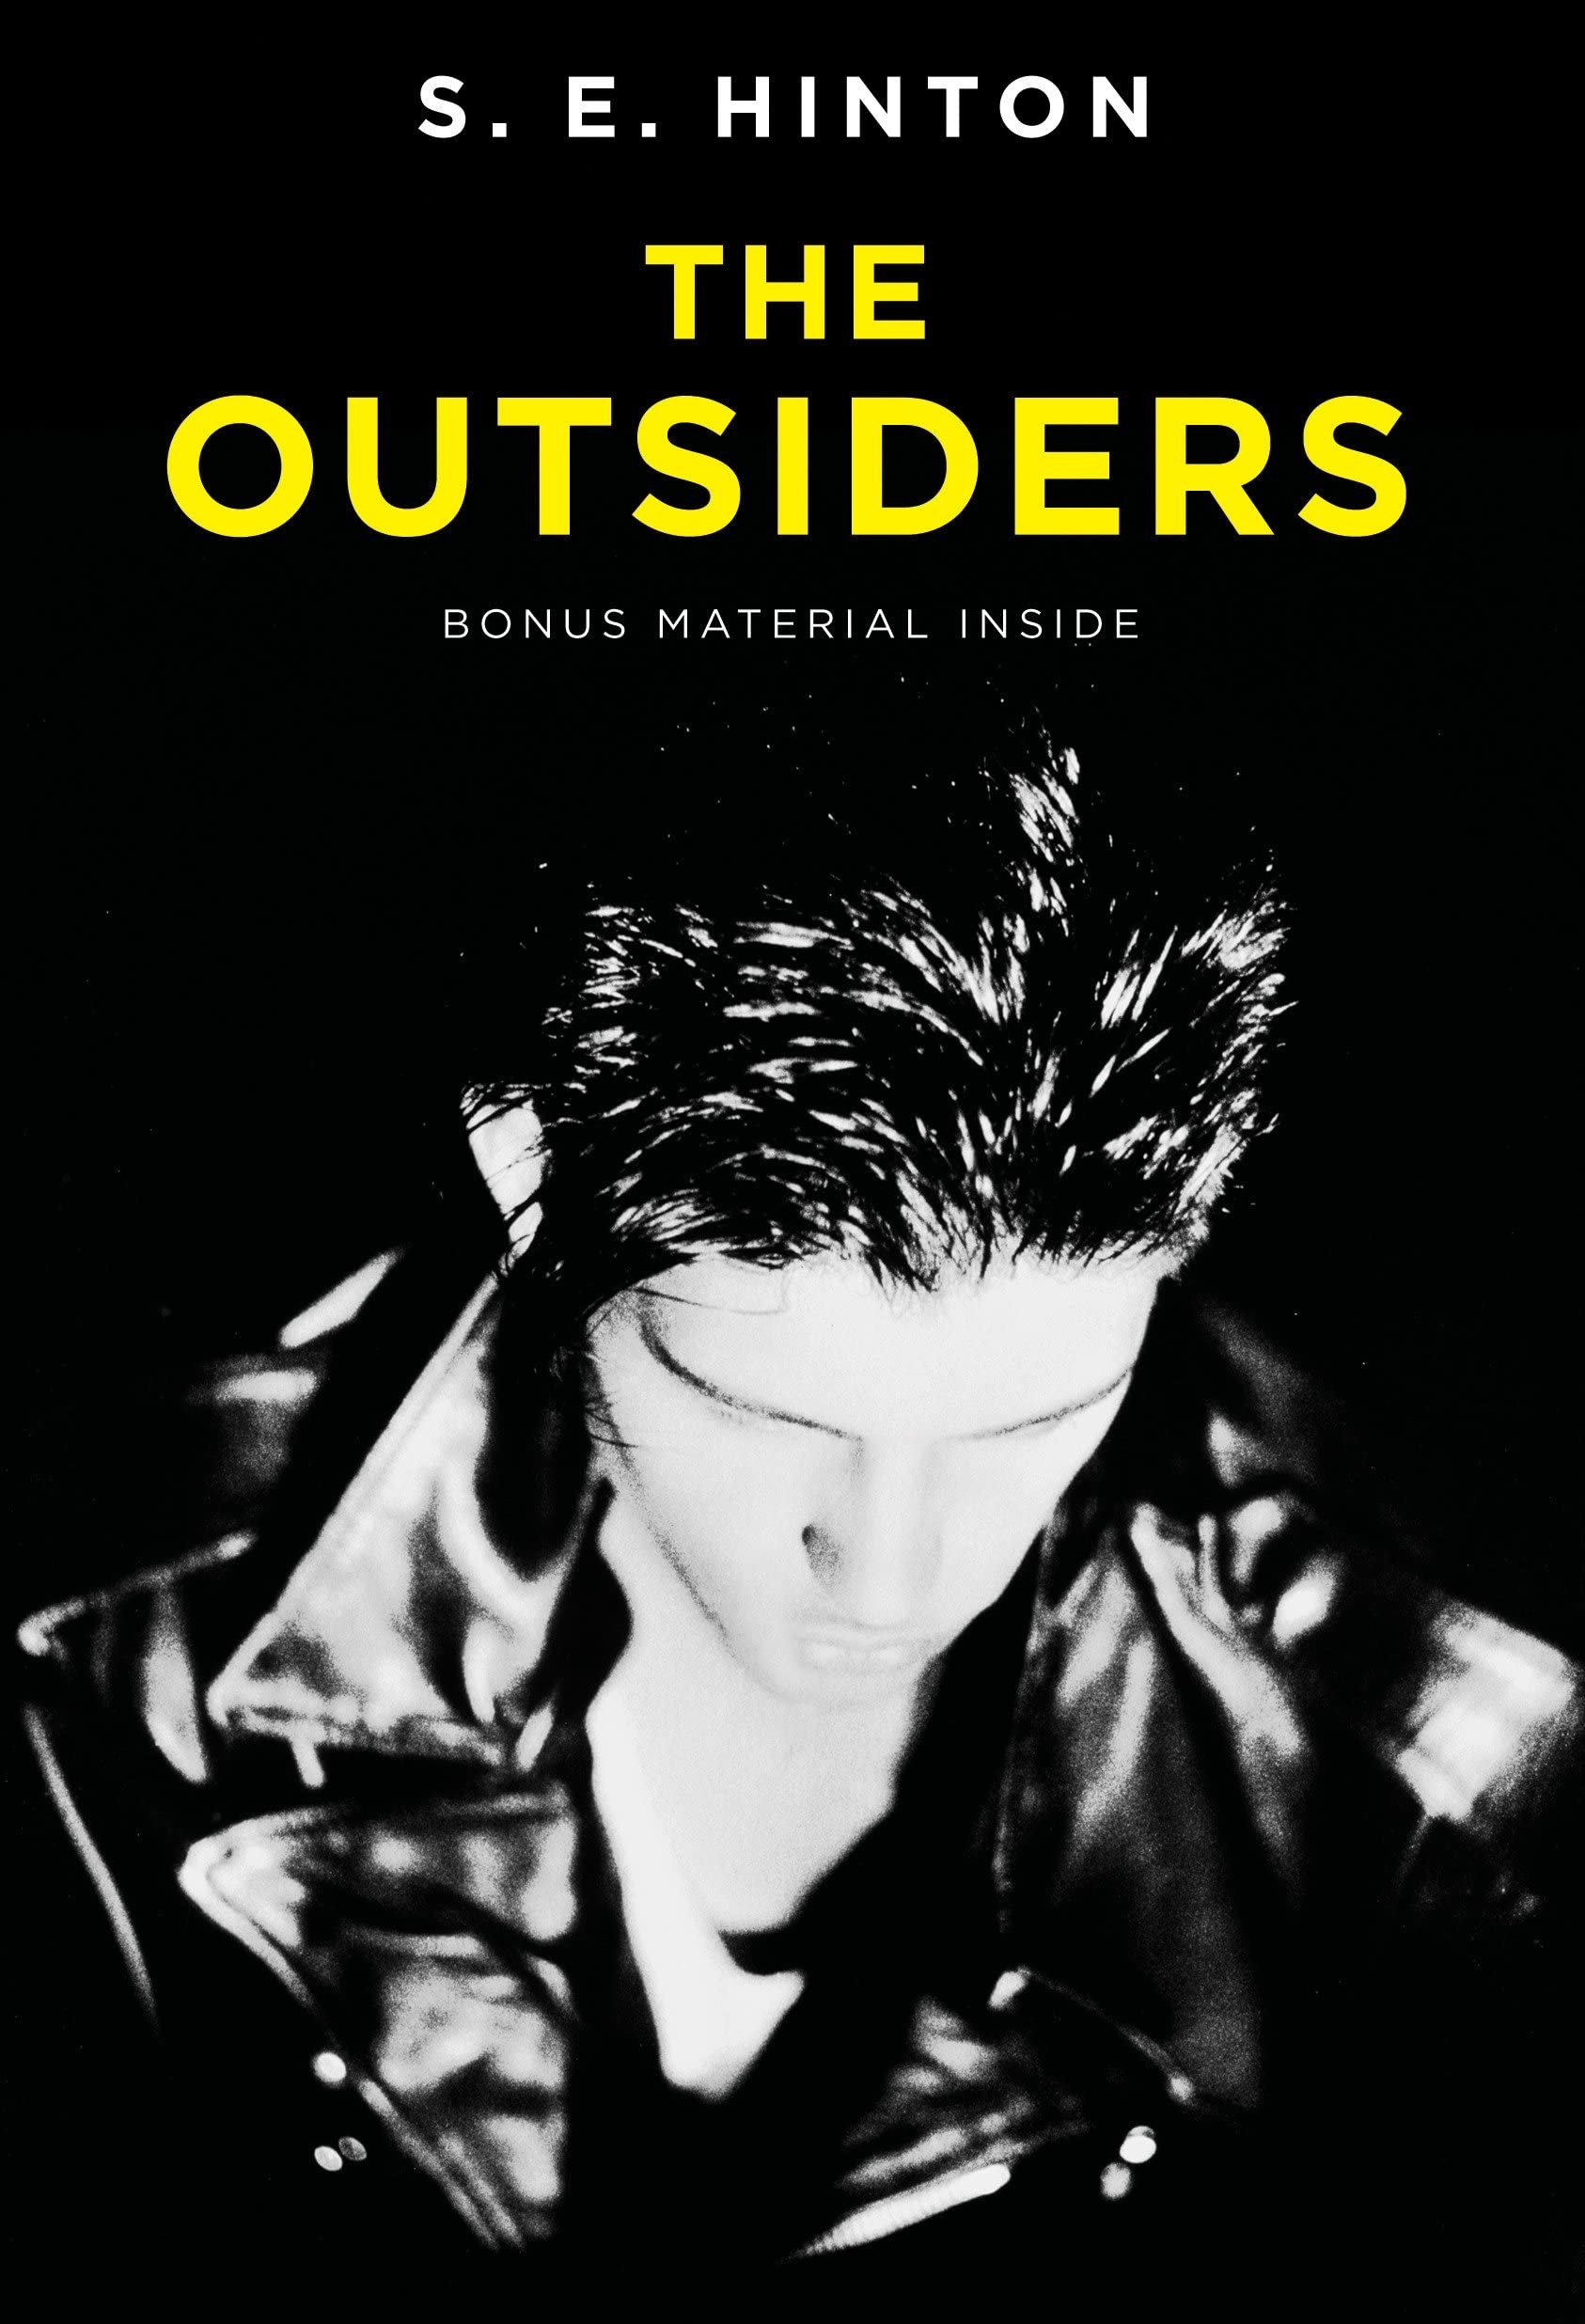 &quot;The Outsiders&quot; by S.E. Hinton